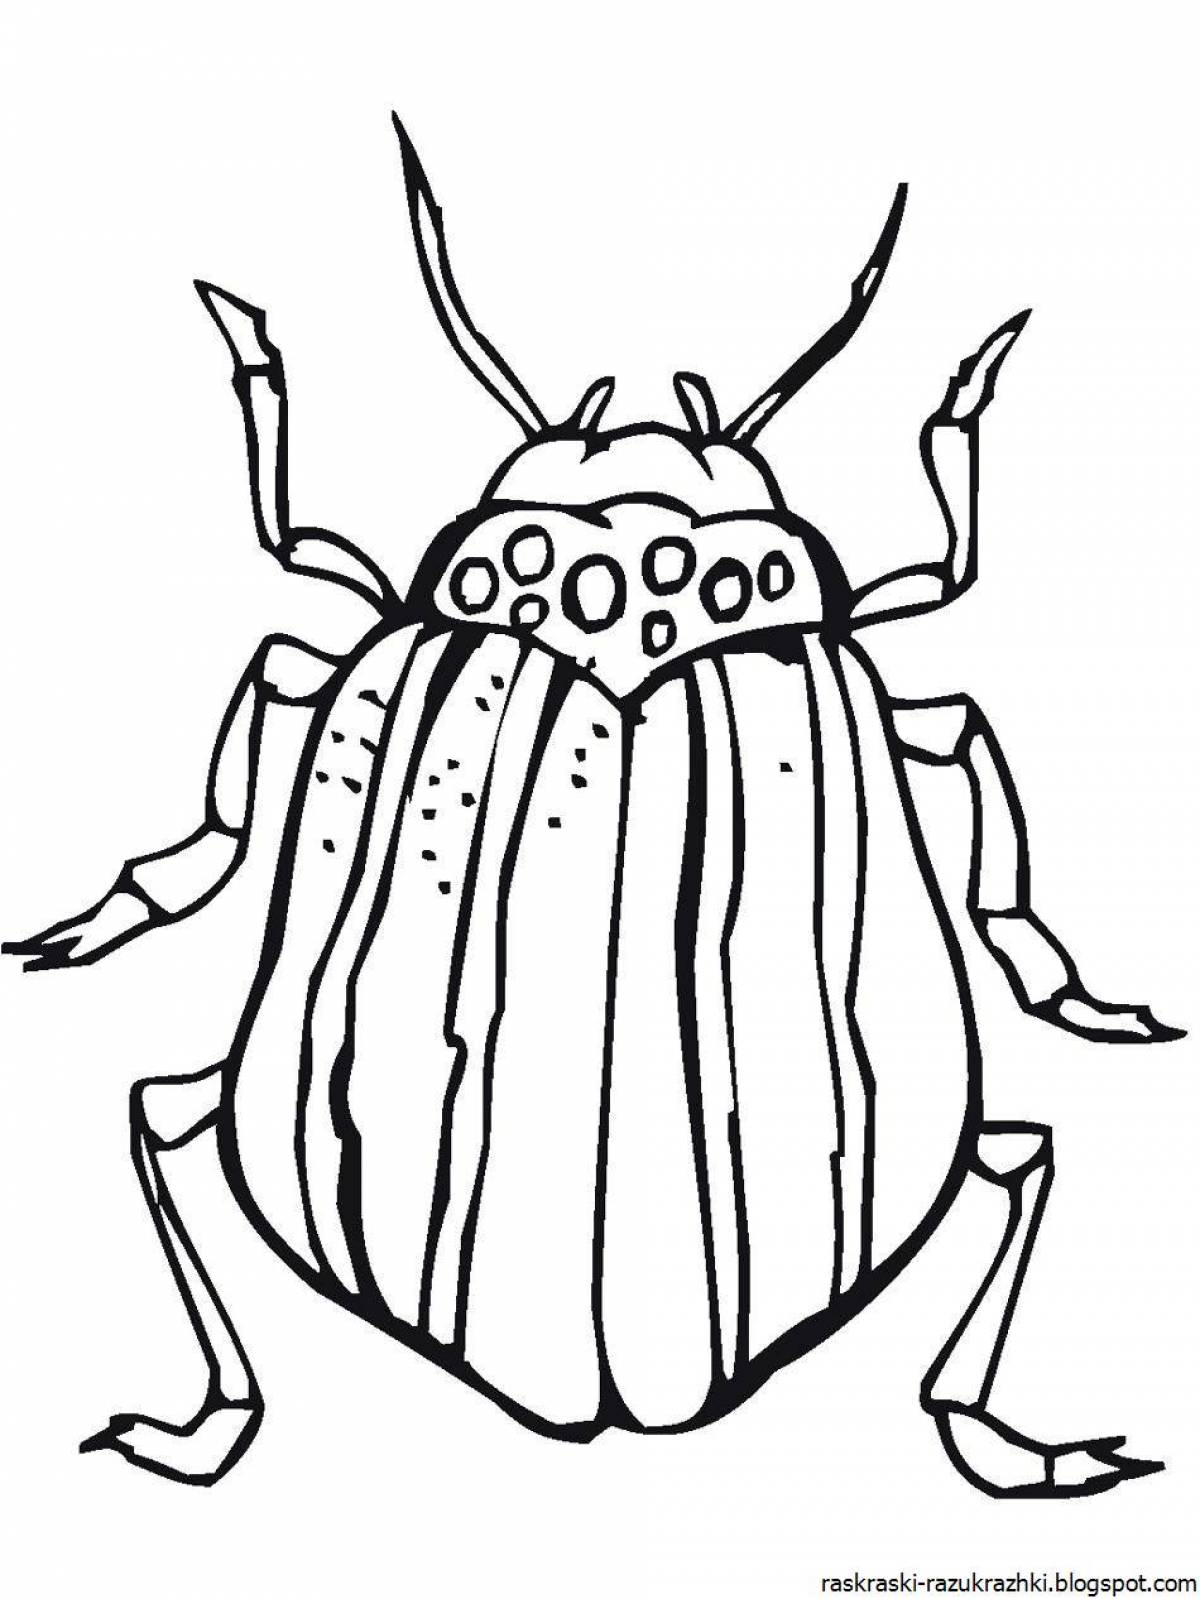 Beetle picture for kids #2